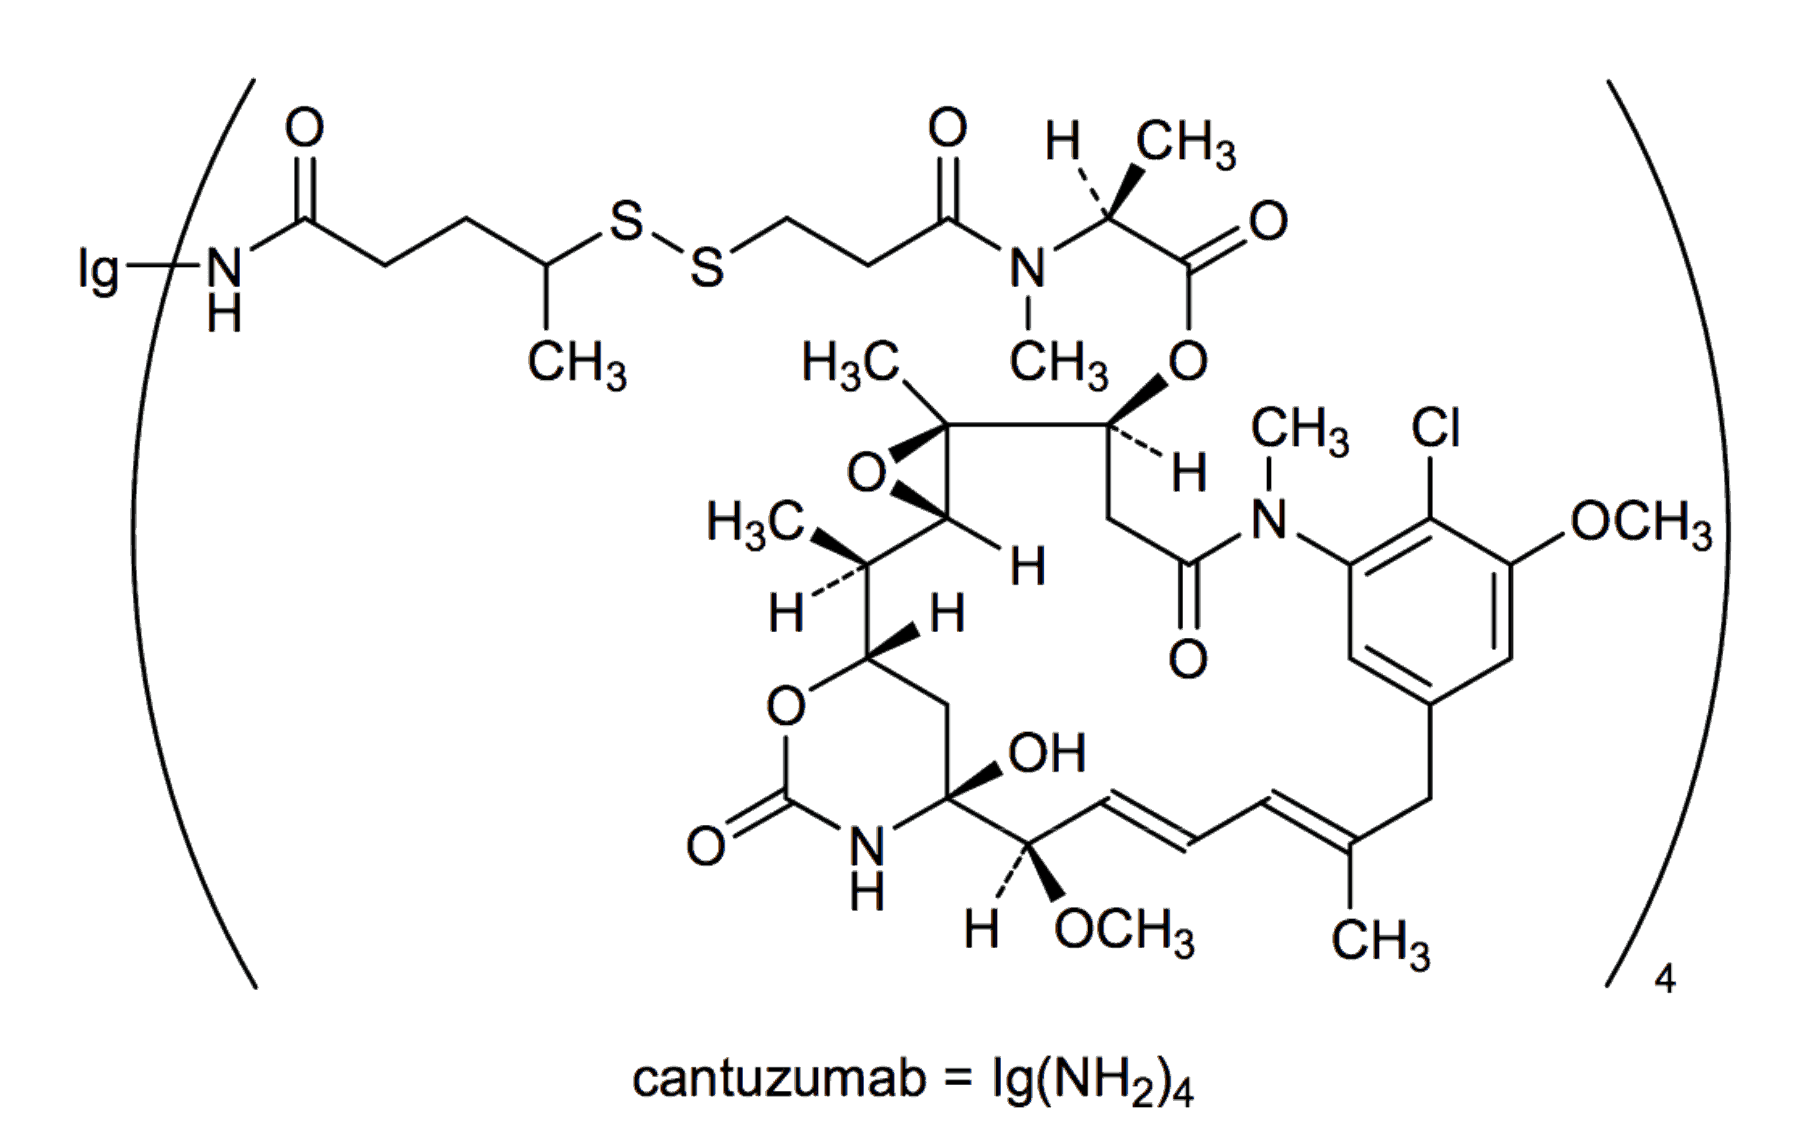 The structure of cantuzumab mertansine.